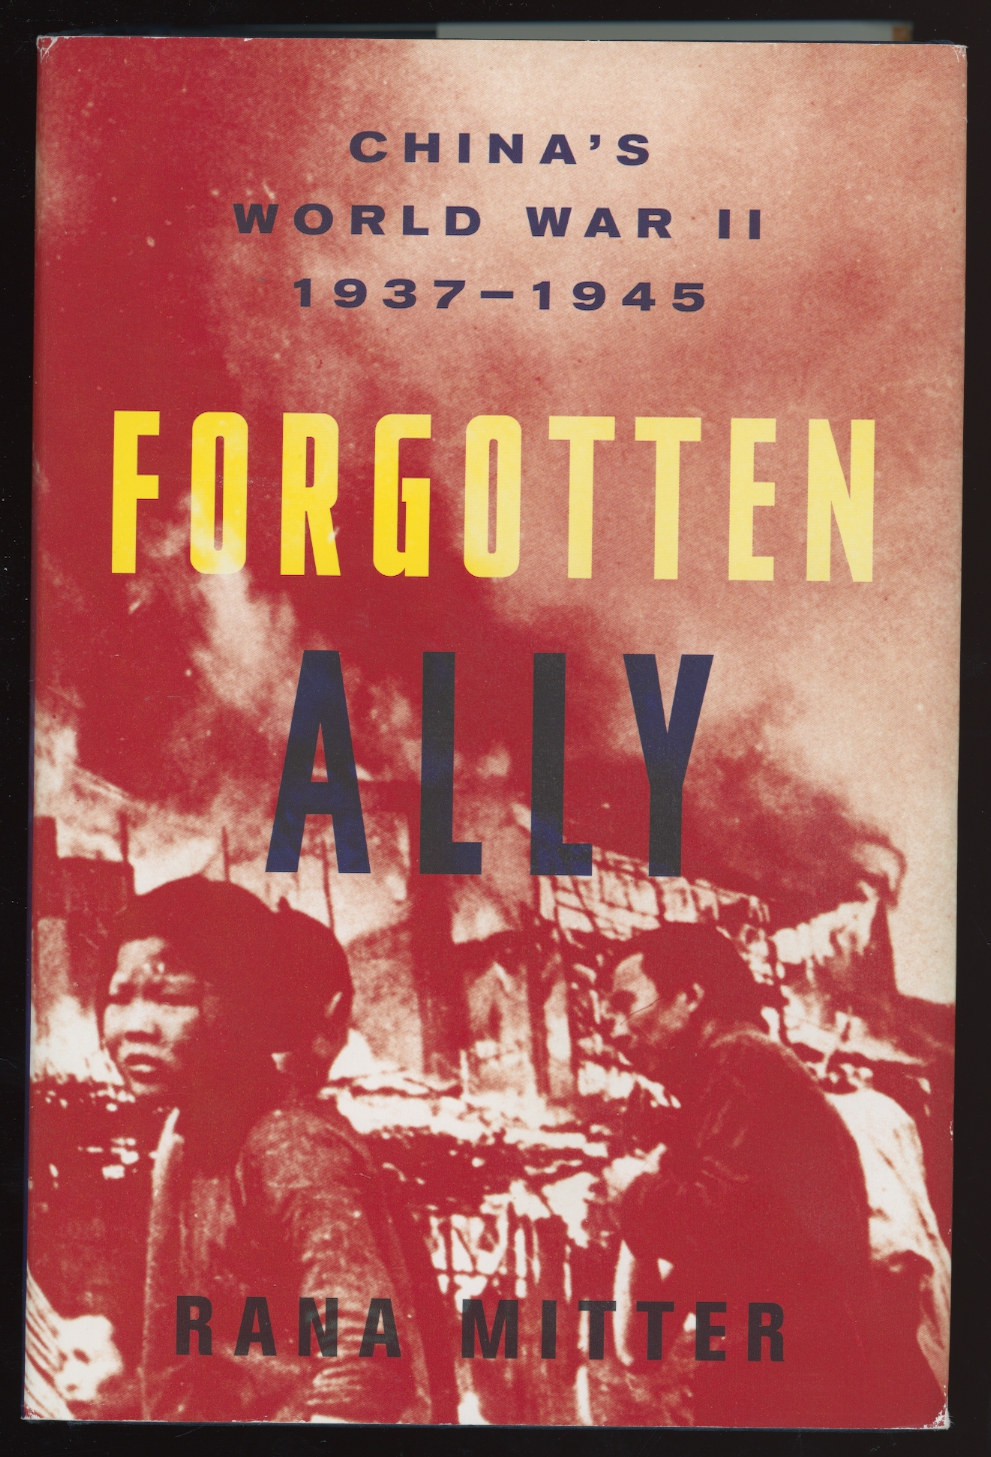 Forgotten Ally, China's World War II 1937-1945, by Rana Mitter, 2013, an excellent book, 450 pages, hardbound, like new condition, (1 lb 14 oz)